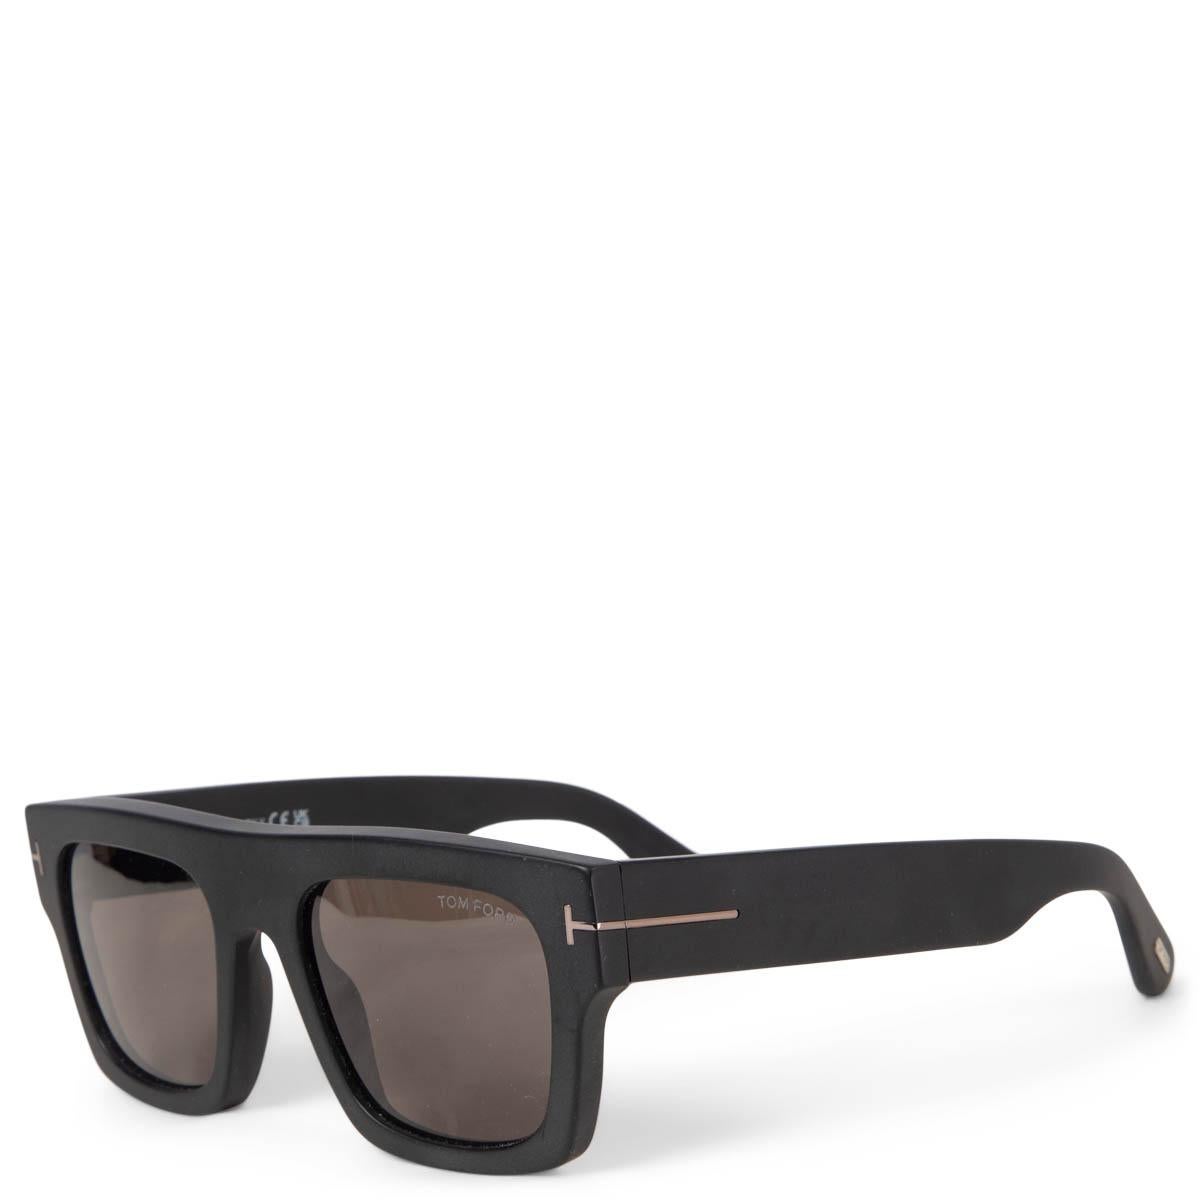 TOM FORD black FAUSTO Sunglasses TF711 For Sale at 1stDibs